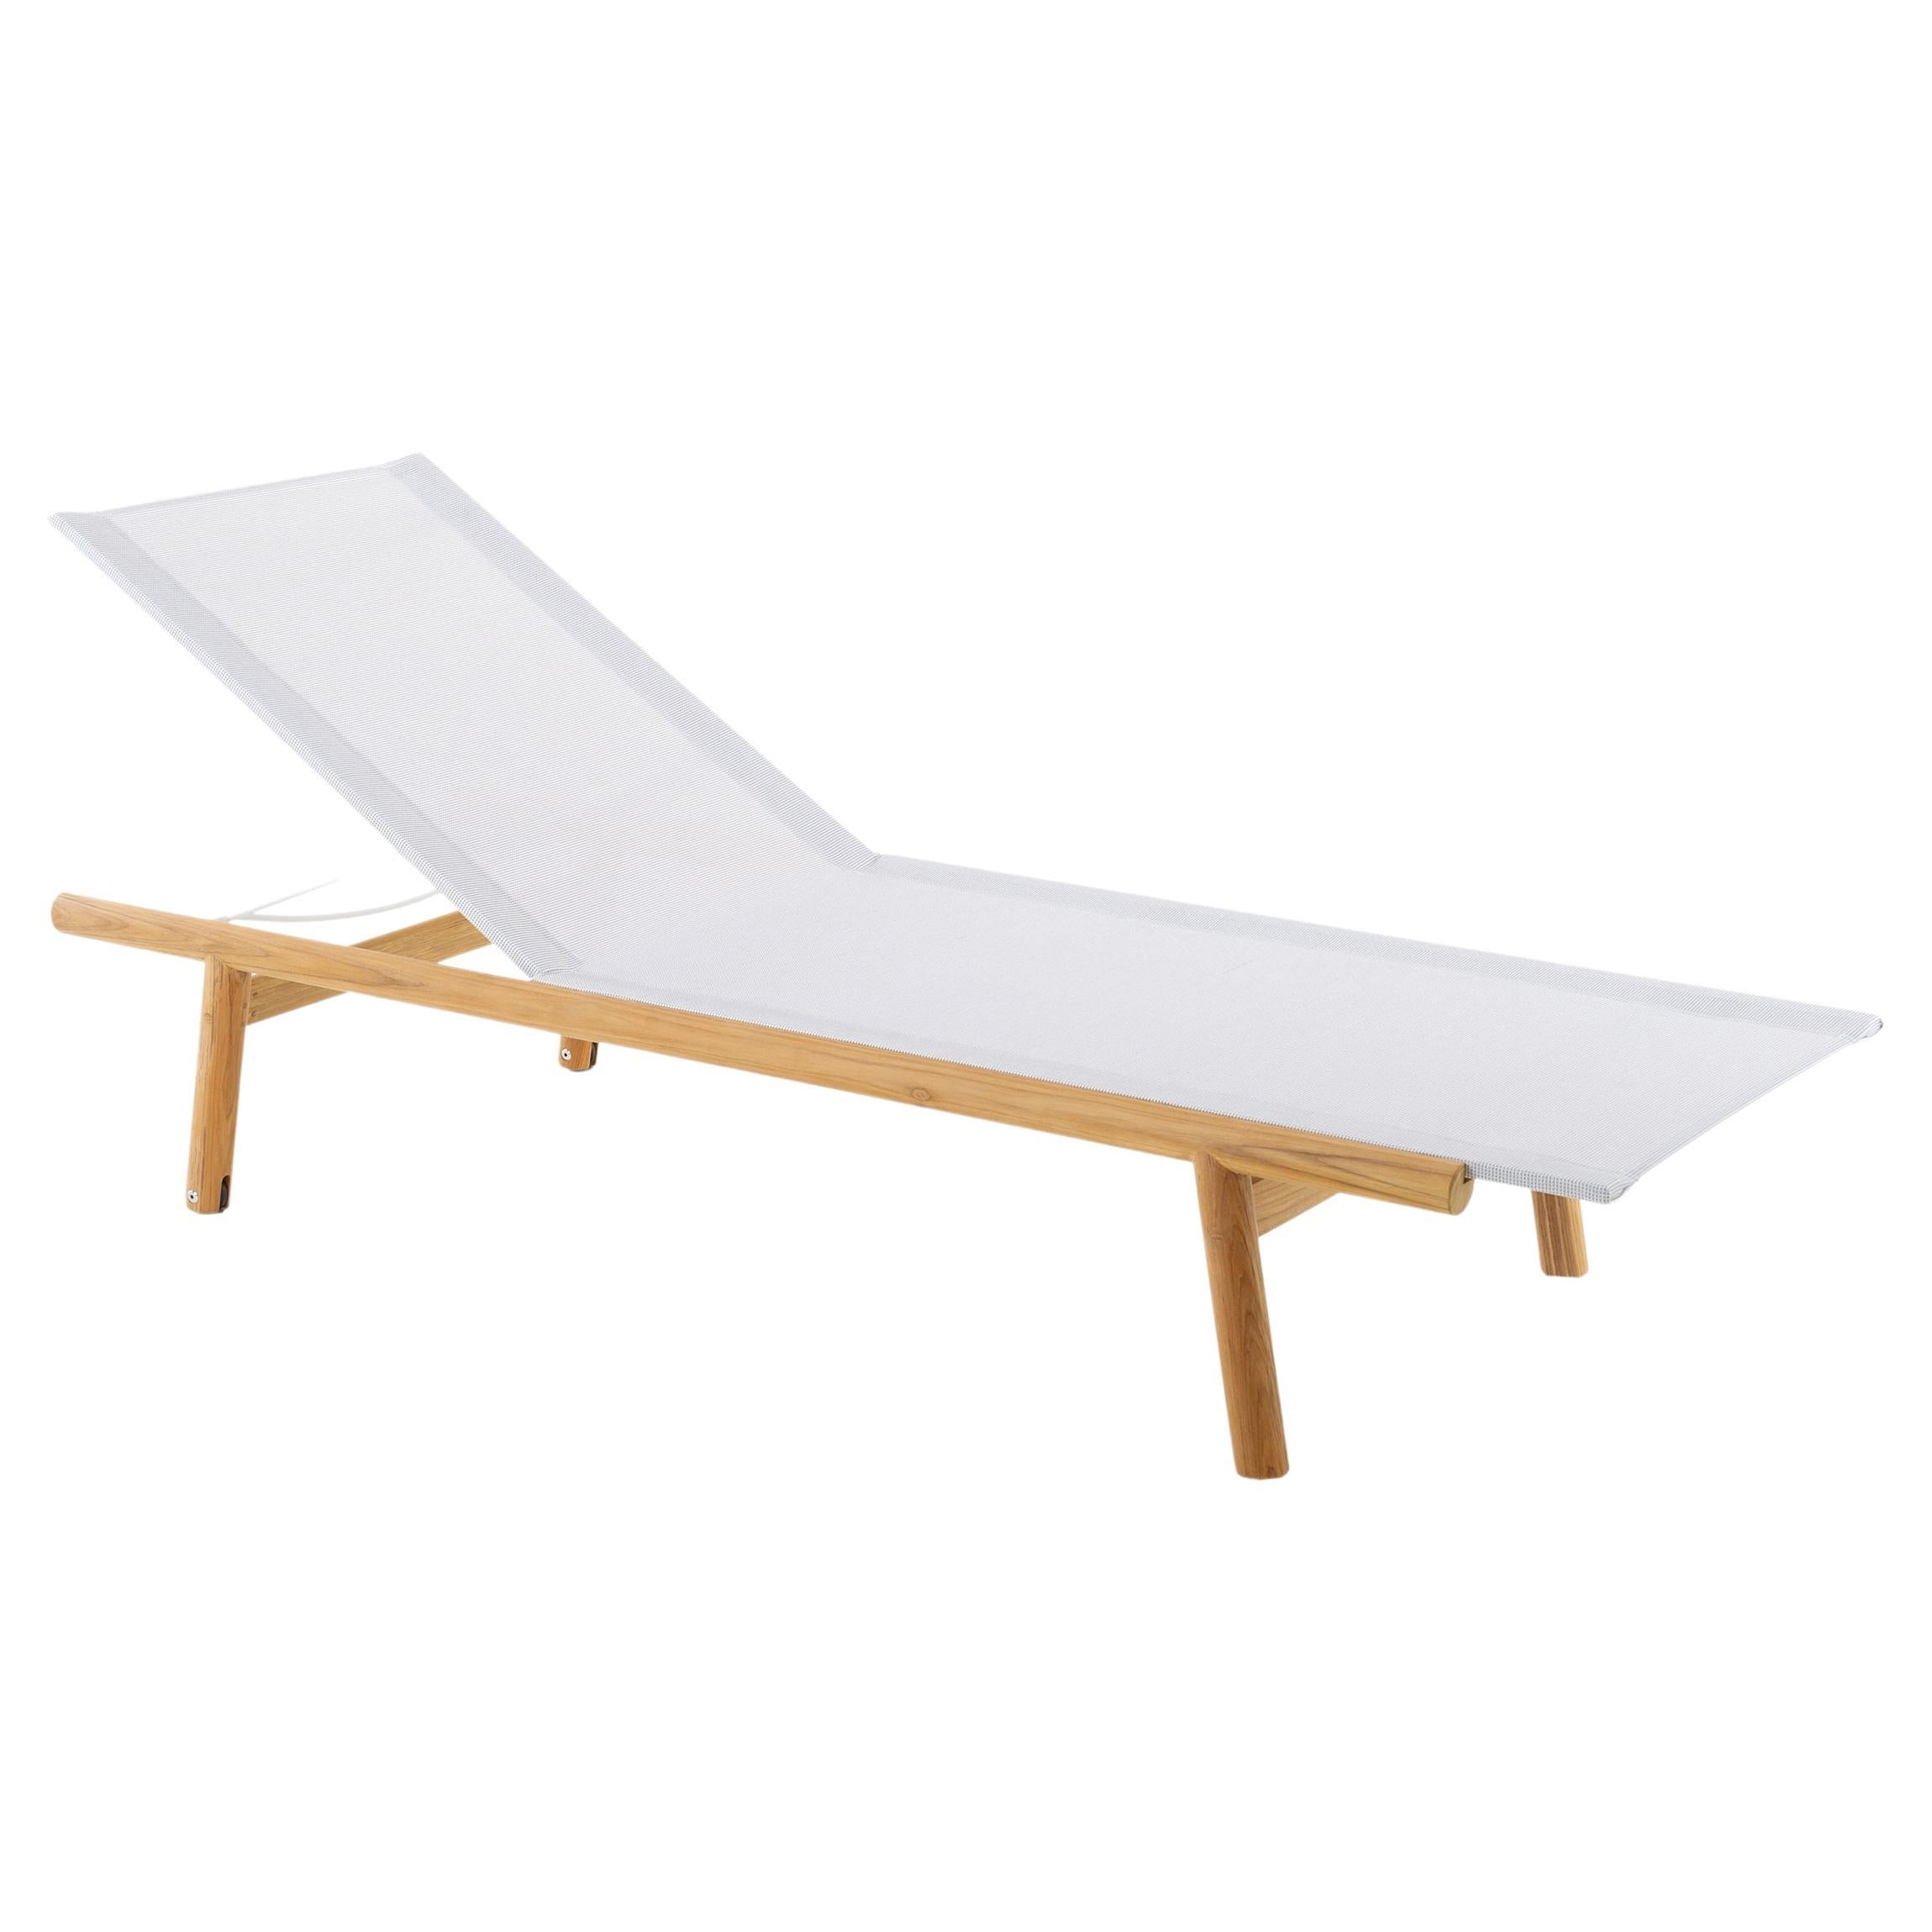 Unopiu' Pevero Sunlounger Outdoor Collection For Sale